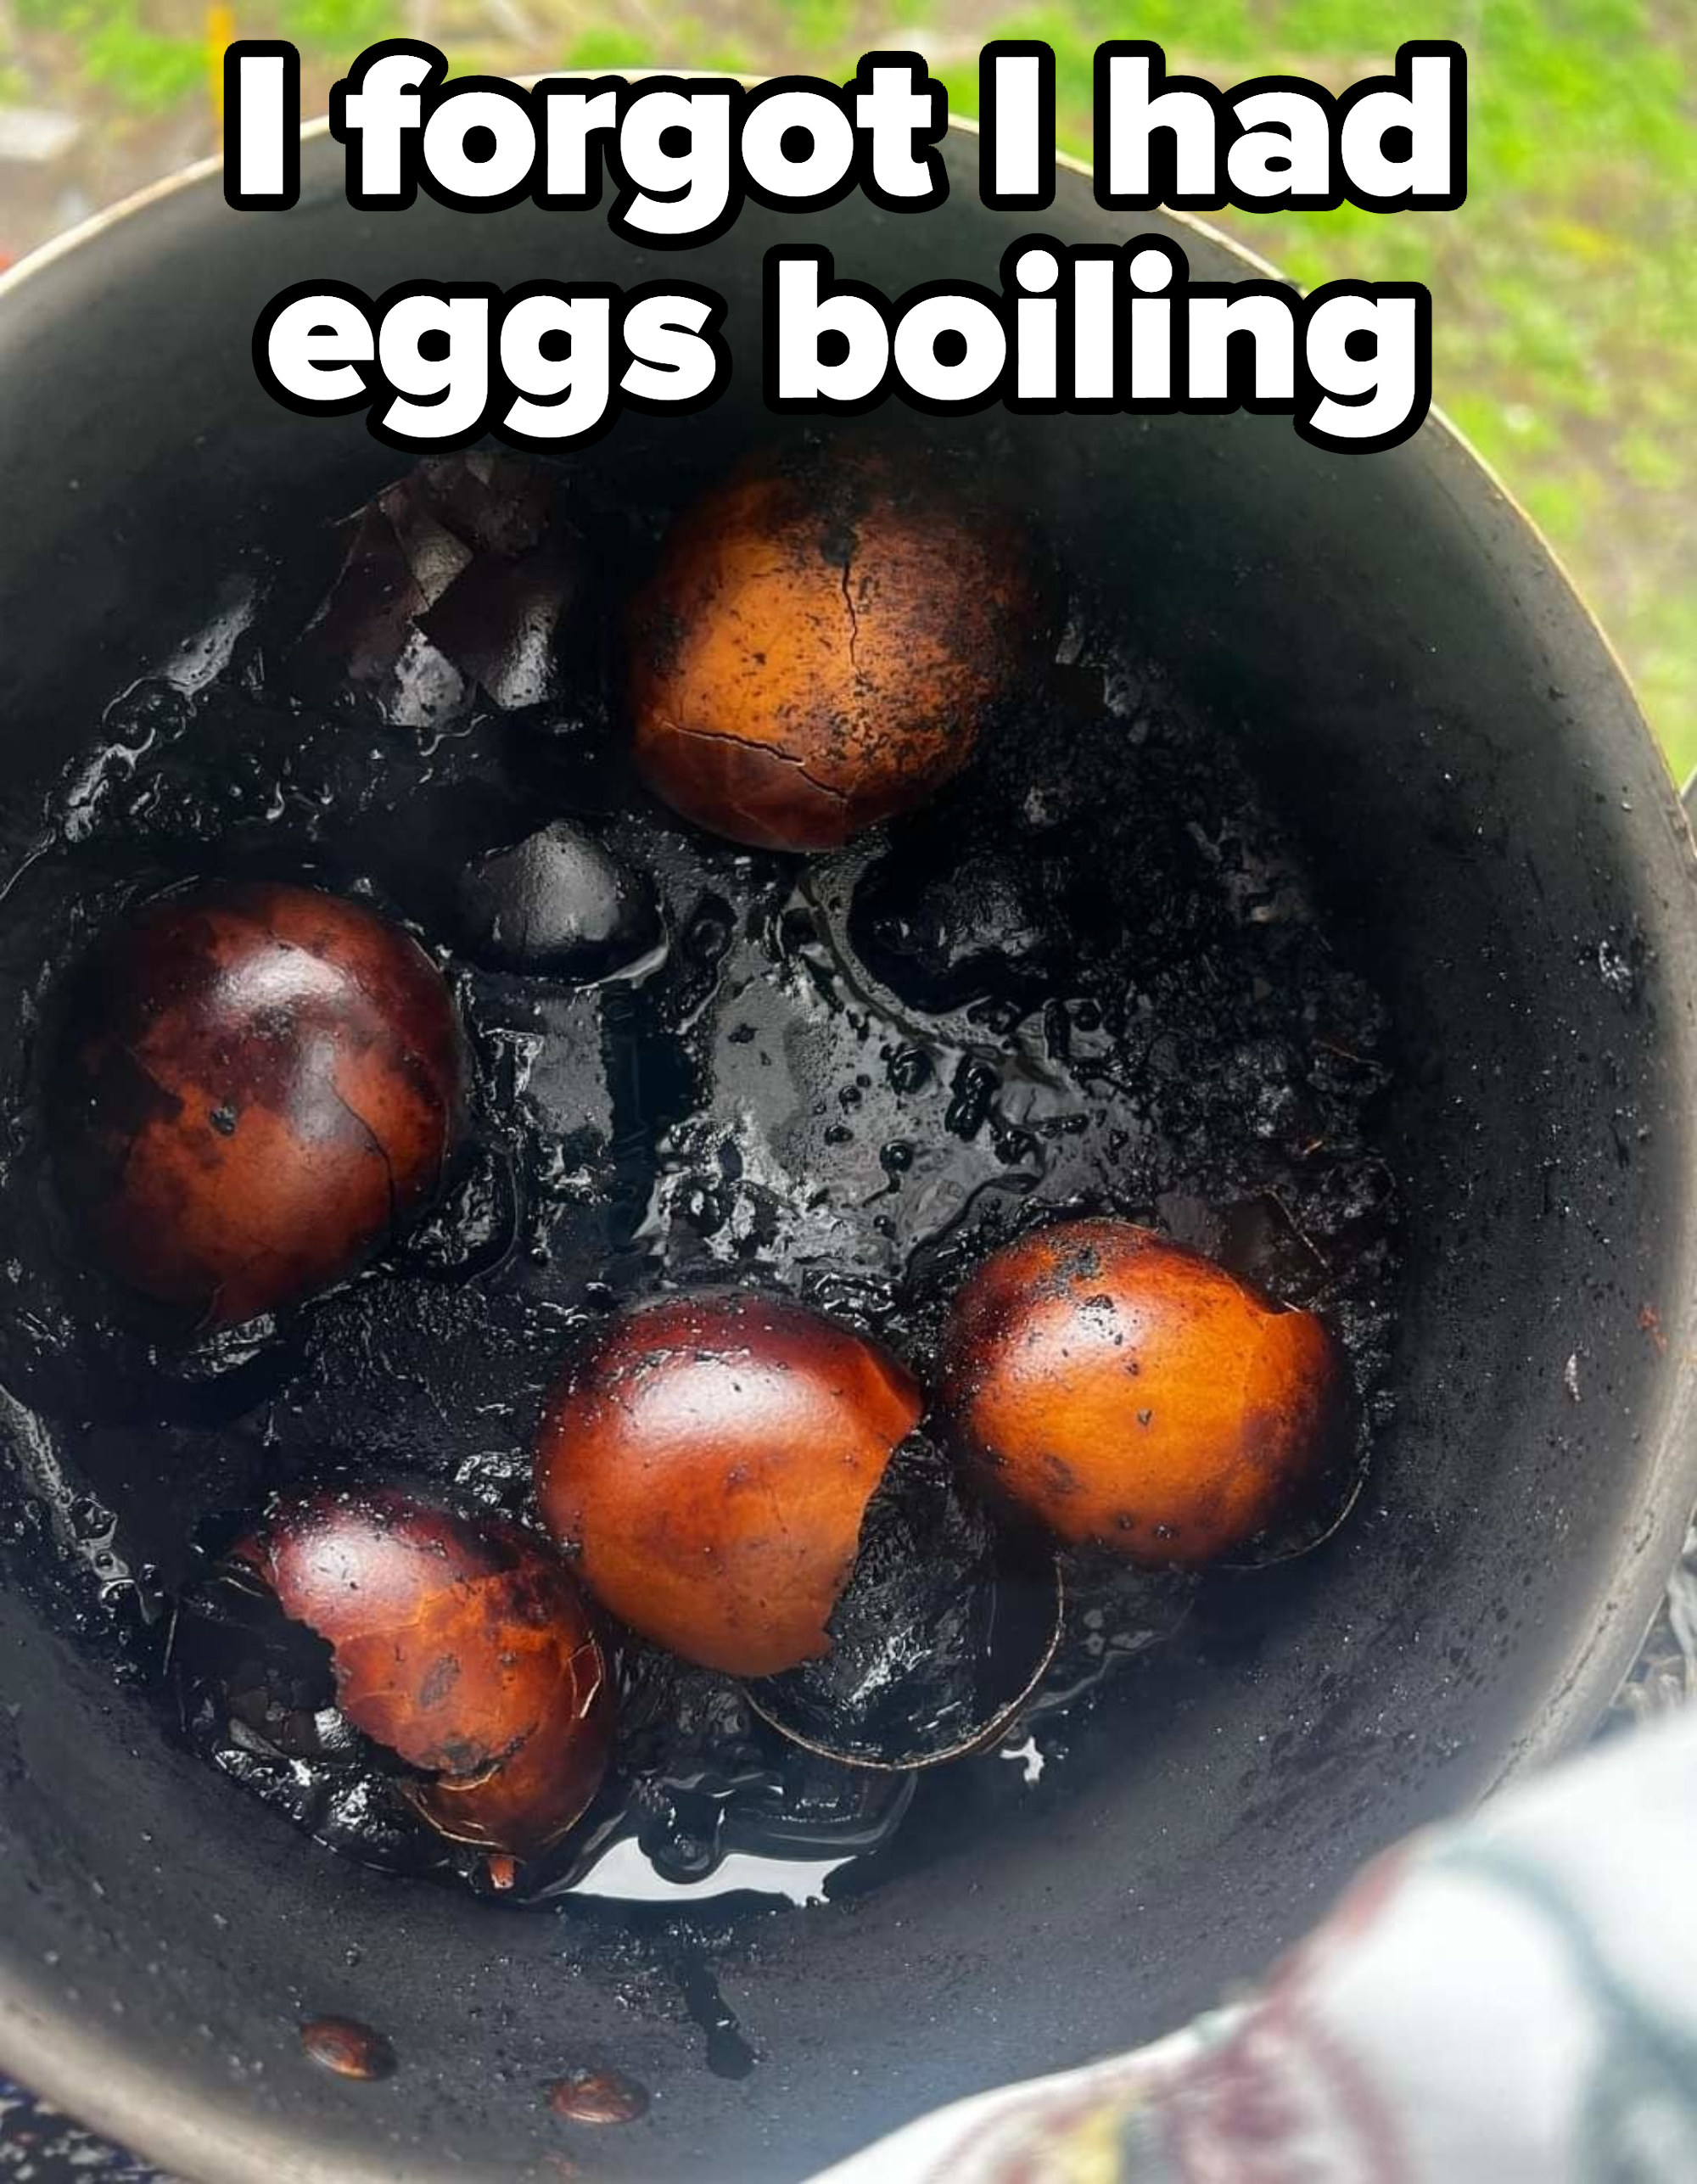 Boiling eggs that are now burnt